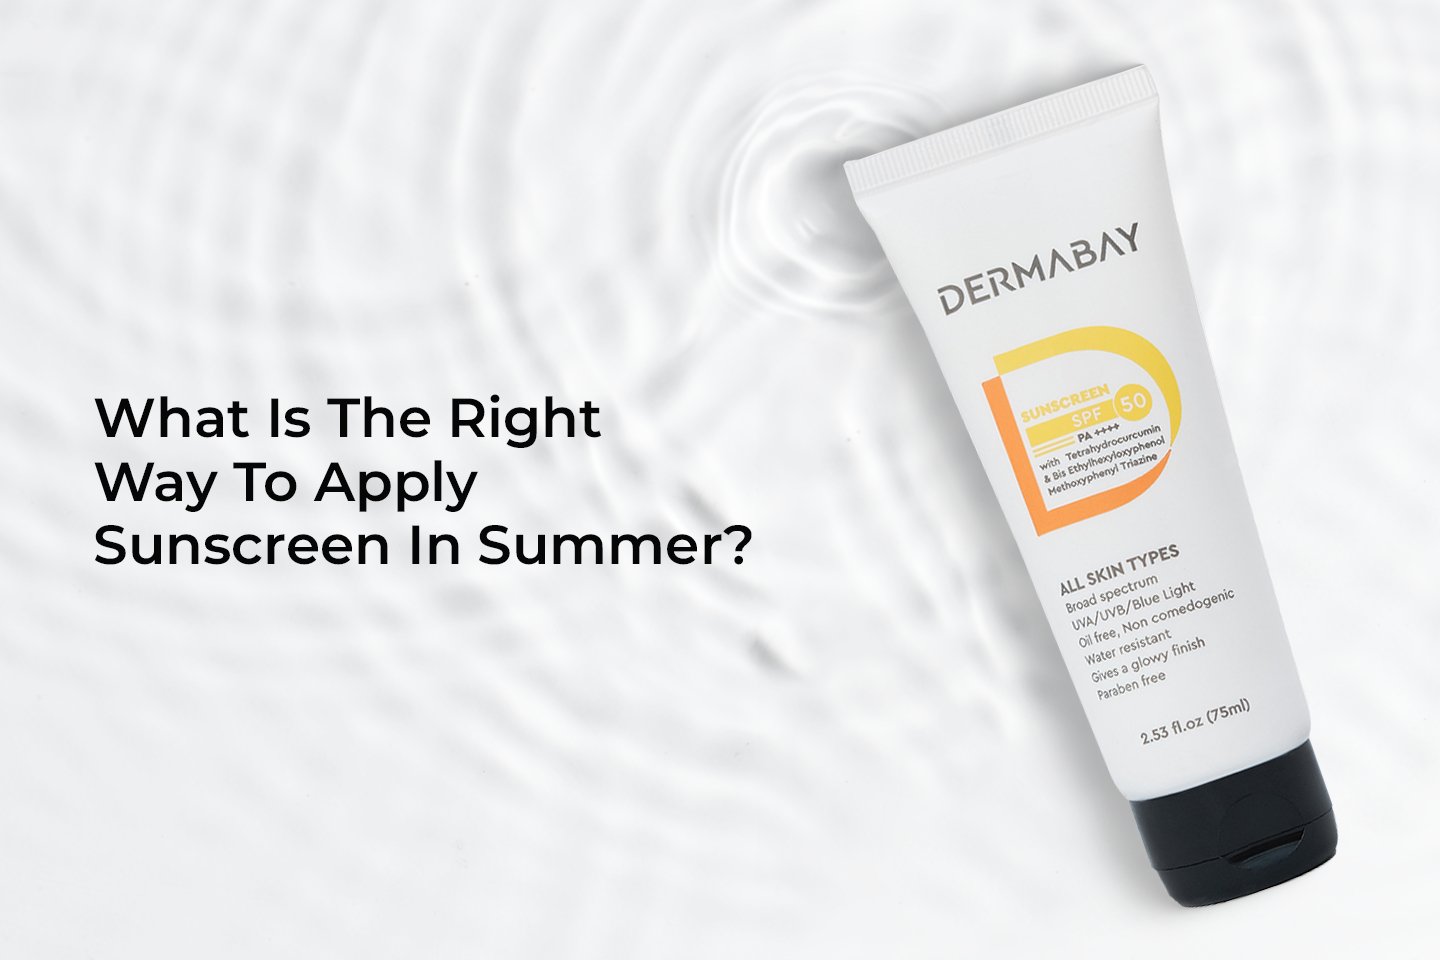 What Is The Right Way To Apply Sunscreen In Summer? - Dermabay